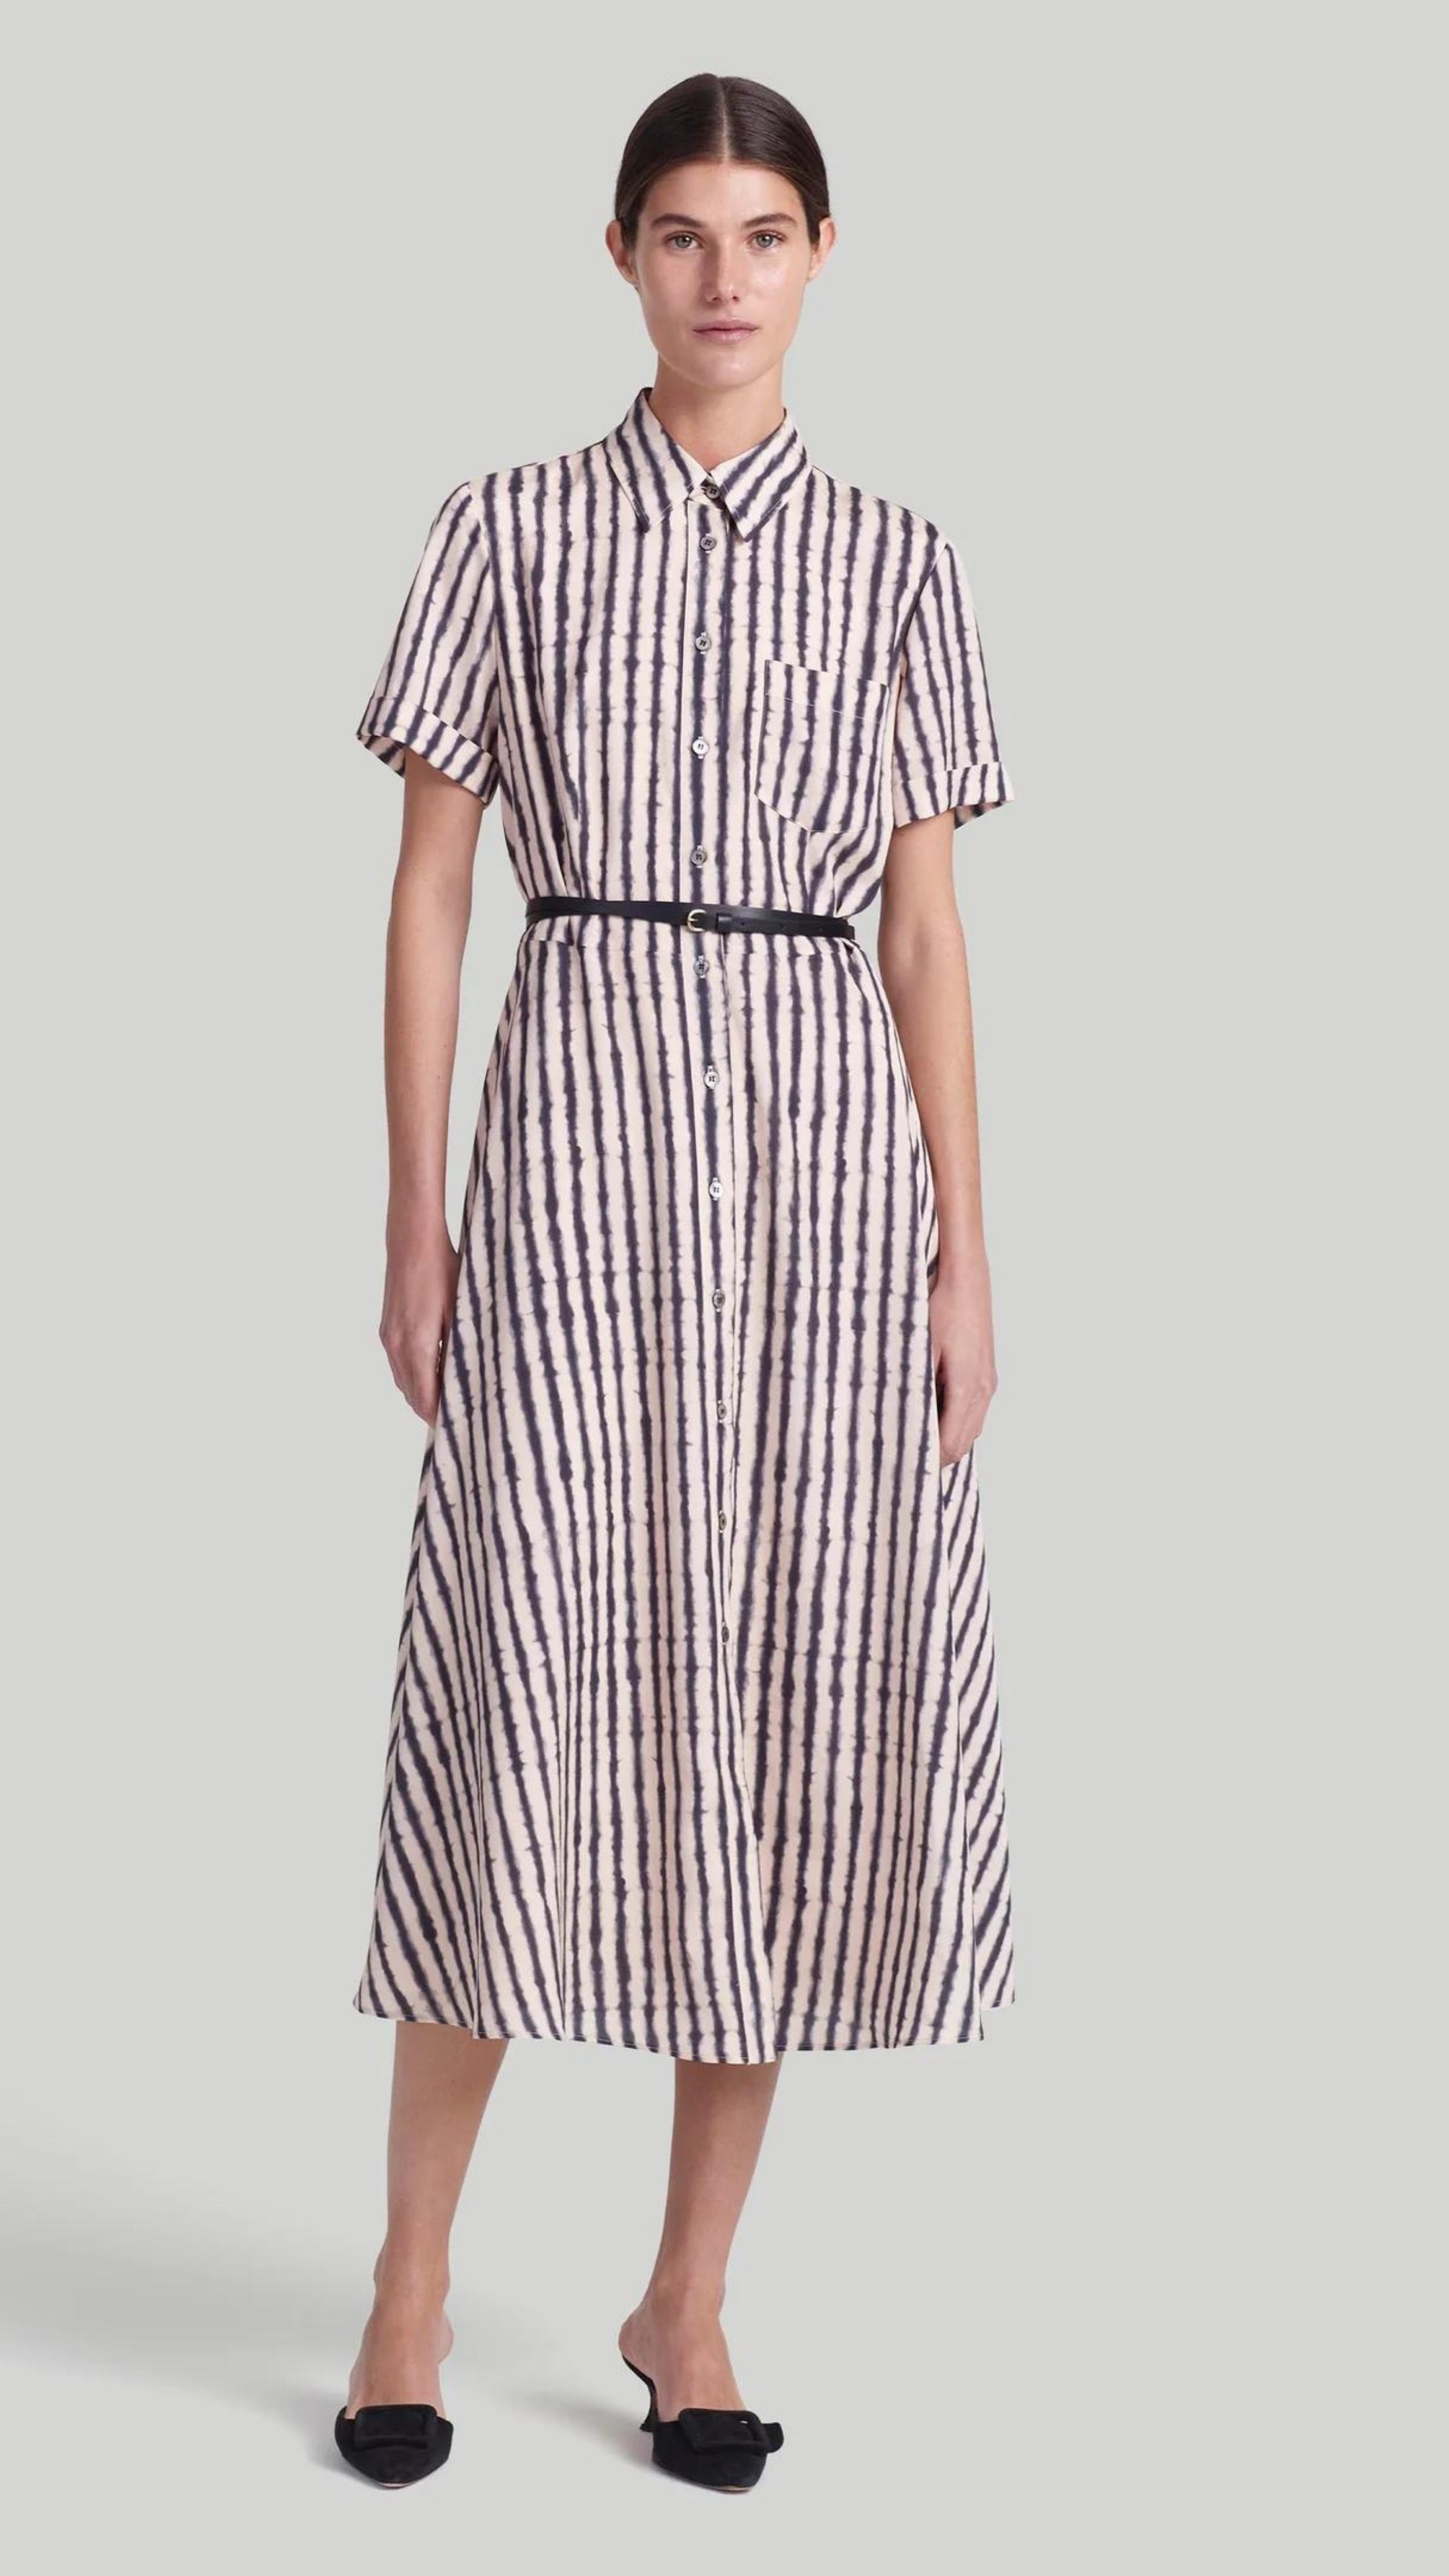 Altuzarra Kiera Dress The 'Kiera' dress is designed with a small point collar, short sleeves and a flattering A-line skirt. It is detailed with a slim leather waist belt and features a black and white stripe pattern and a front breast pocket. Shown on model facing front.